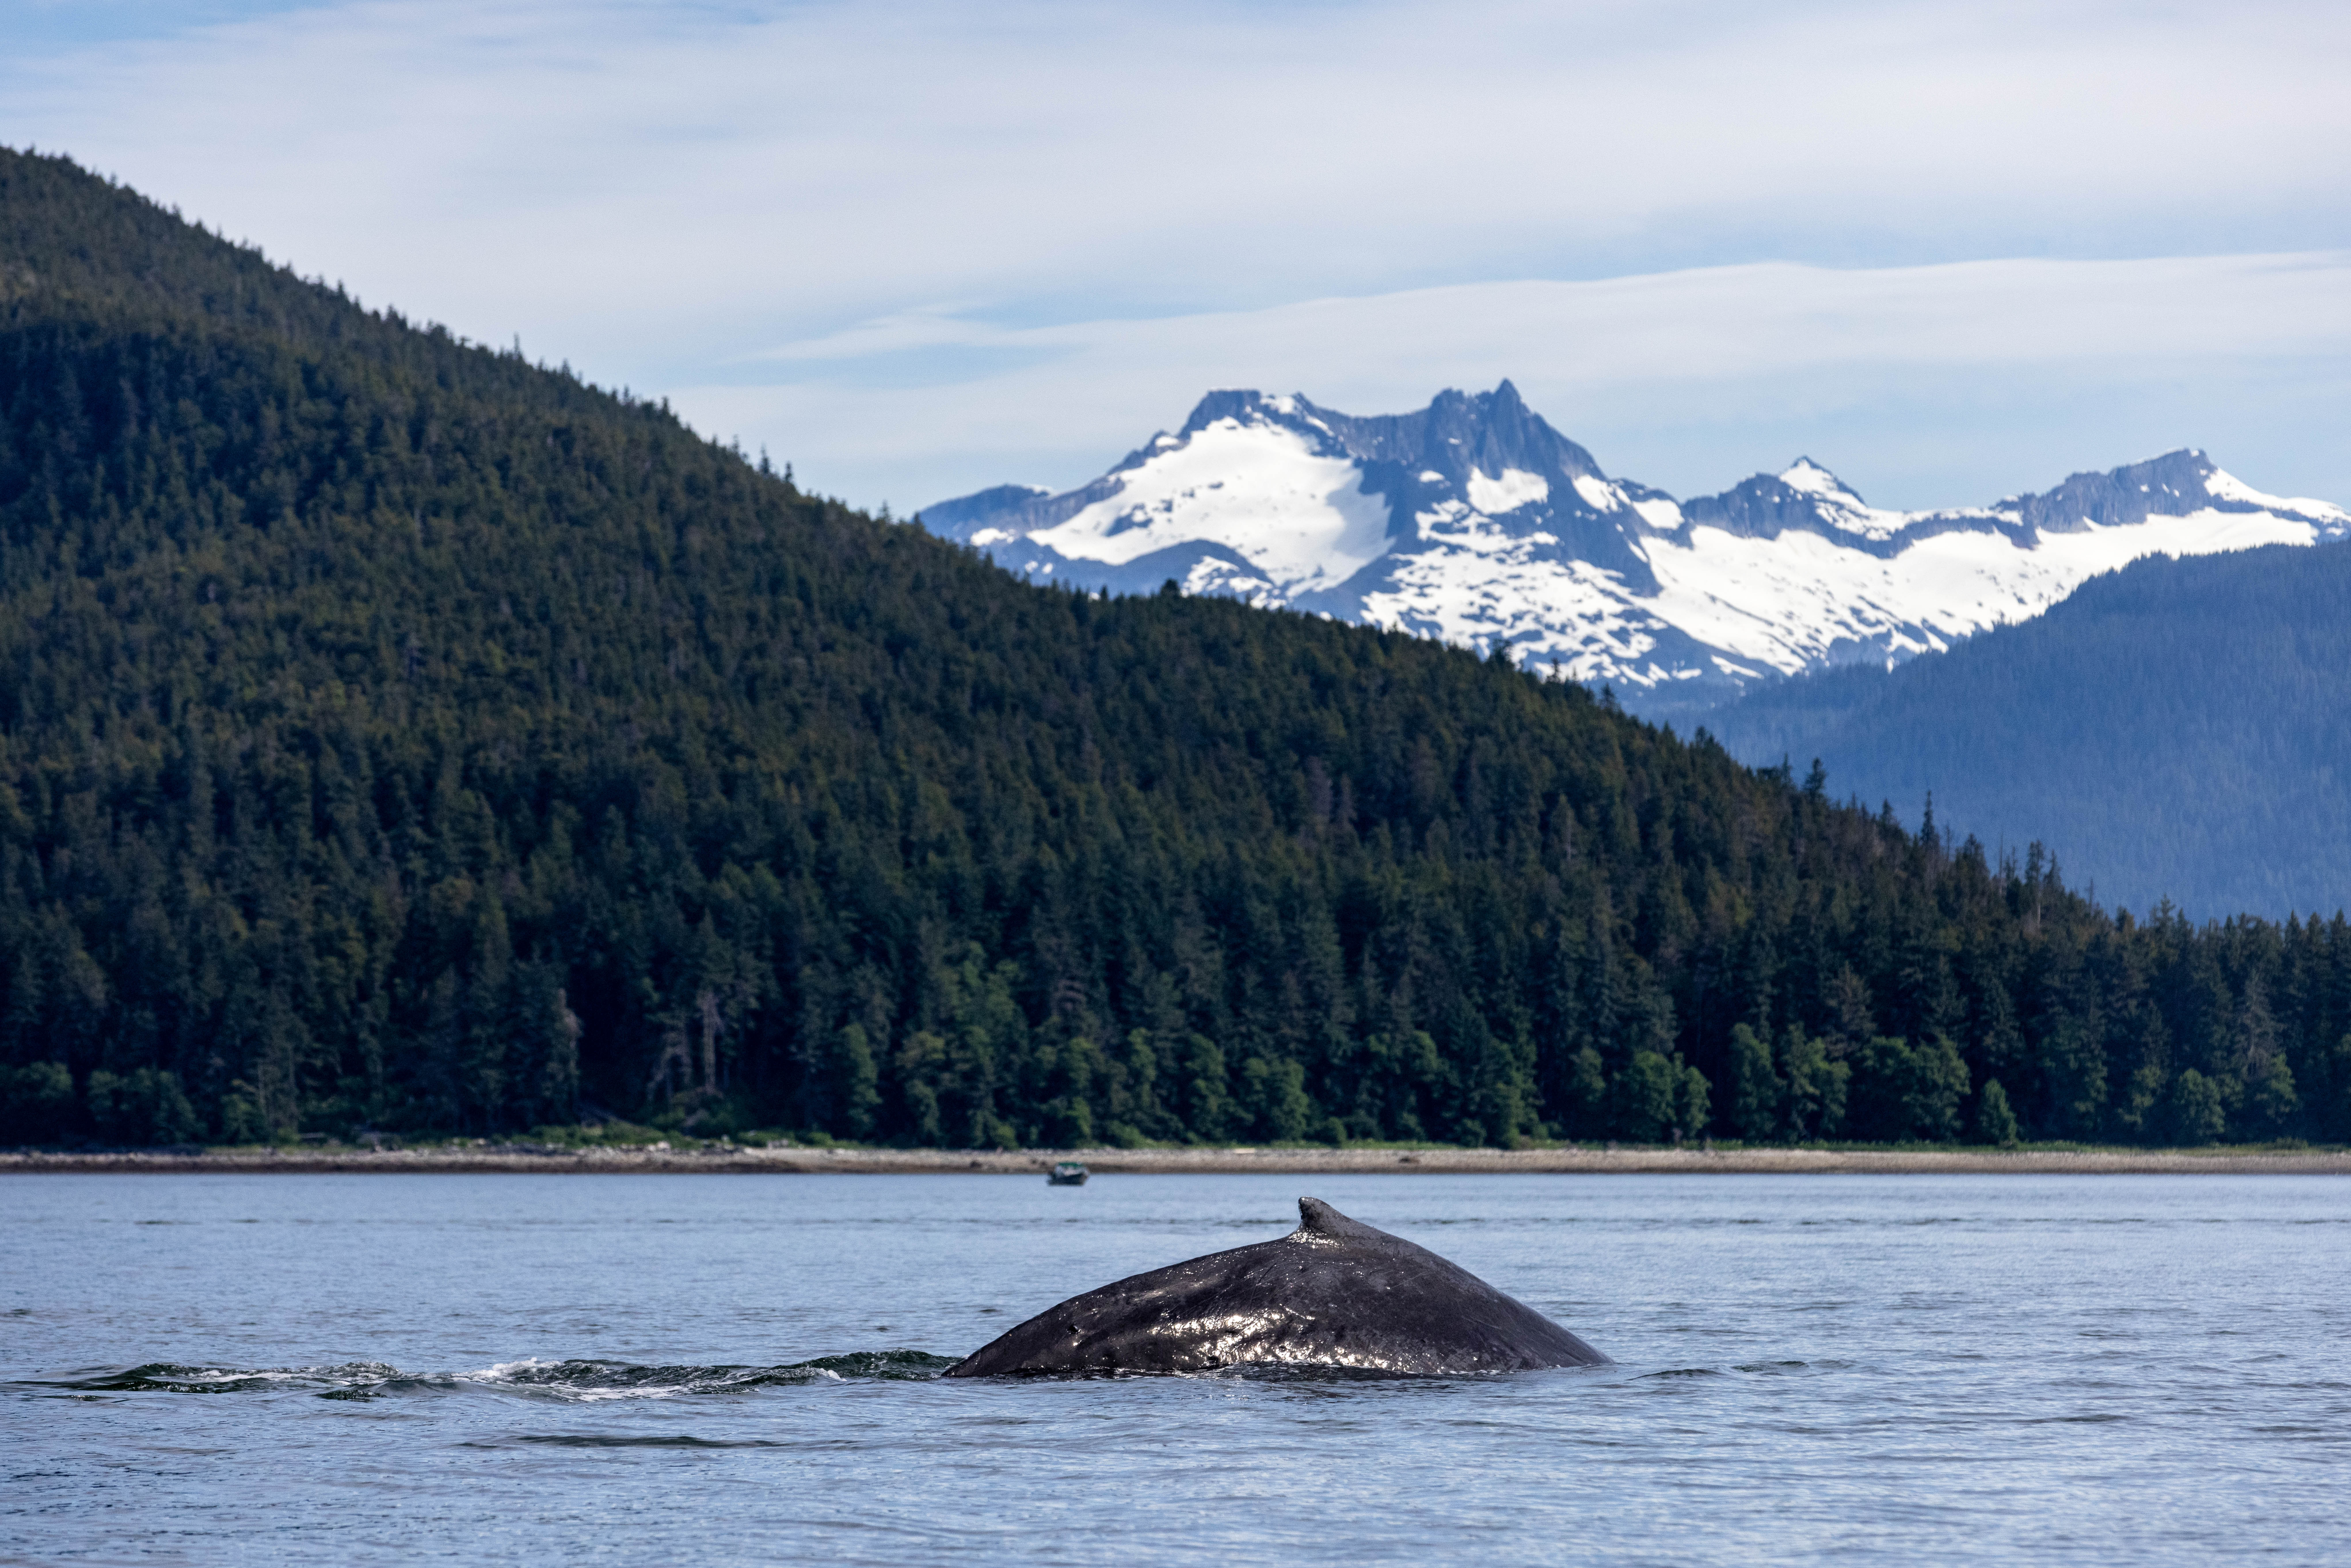 A humpback whale surfaces out of the ocean with a snow capped mountain in the background in Juneau